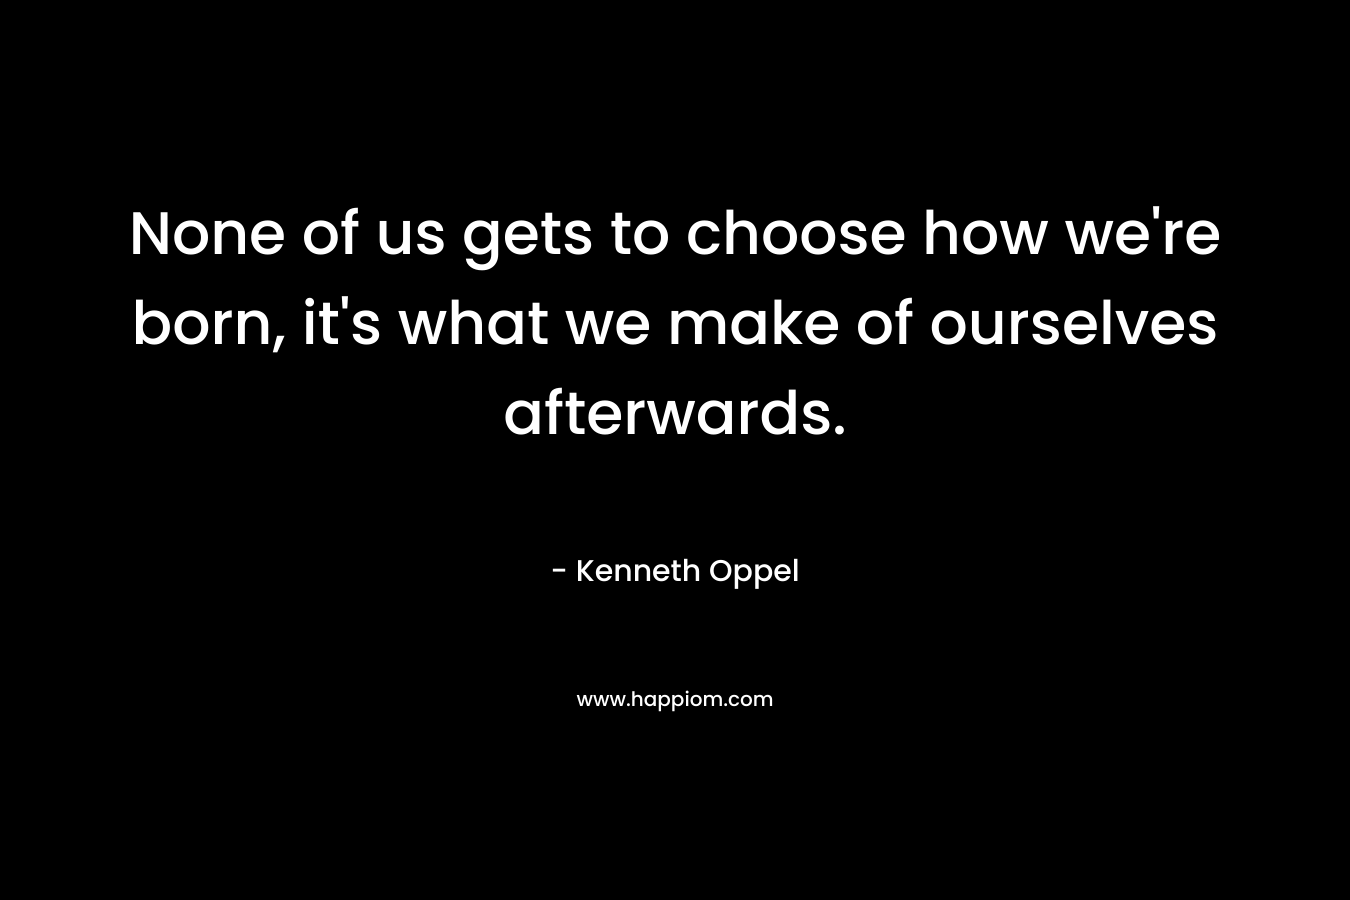 None of us gets to choose how we’re born, it’s what we make of ourselves afterwards. – Kenneth Oppel